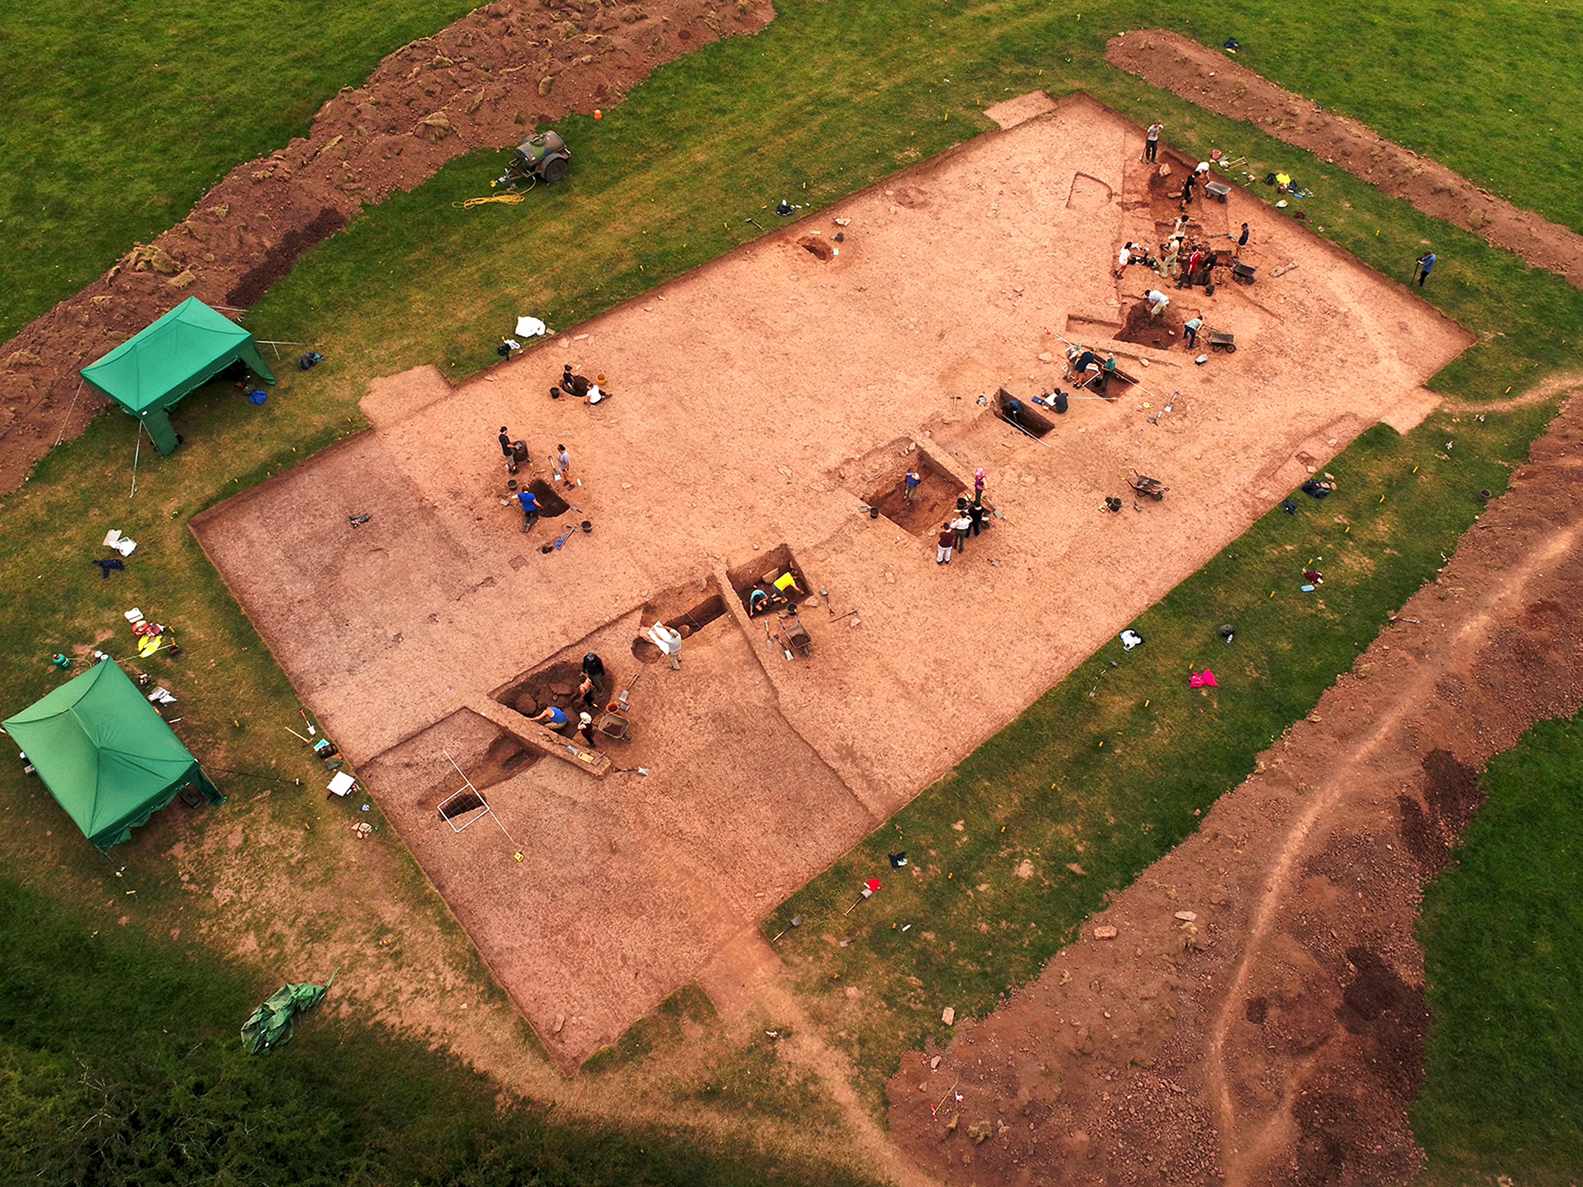 Remarkable complex of early Neolithic monuments discovered in Herefordshire, England 1